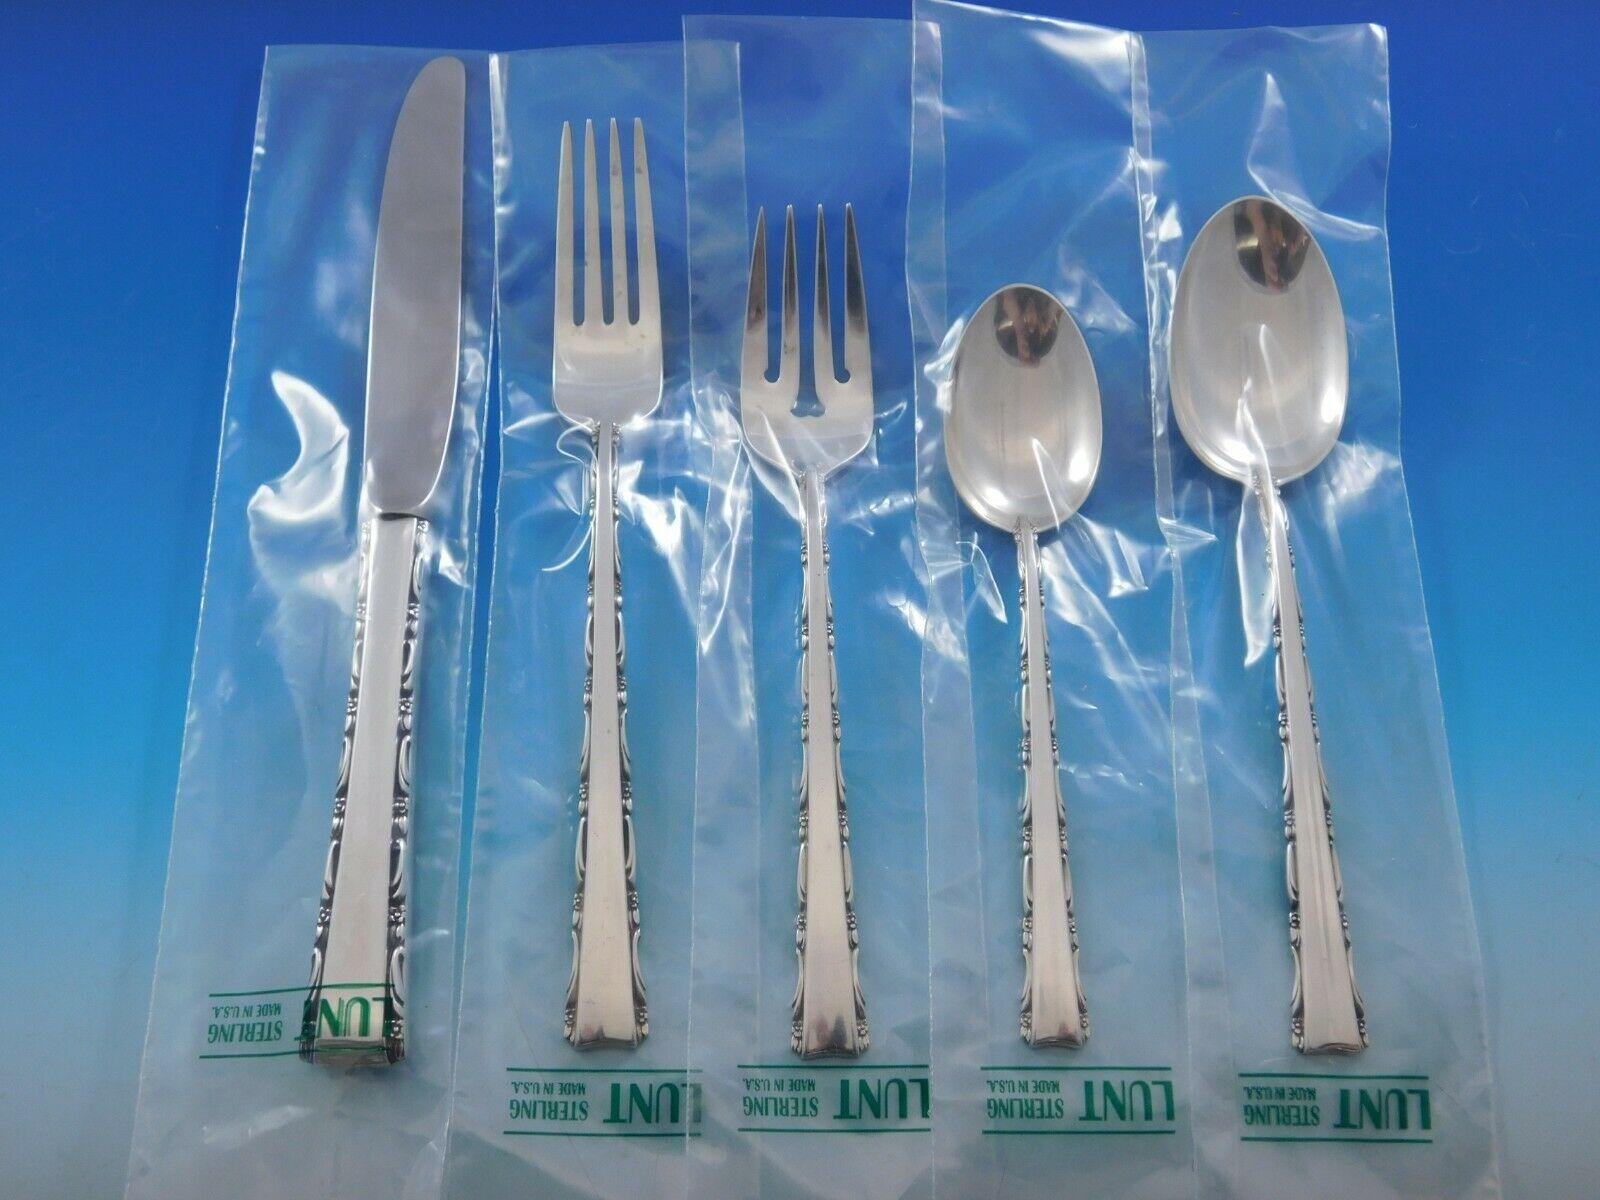 New, unused Madrigal by Lunt sterling silver flatware set, 30 pieces. This set includes:

6 knives, 9